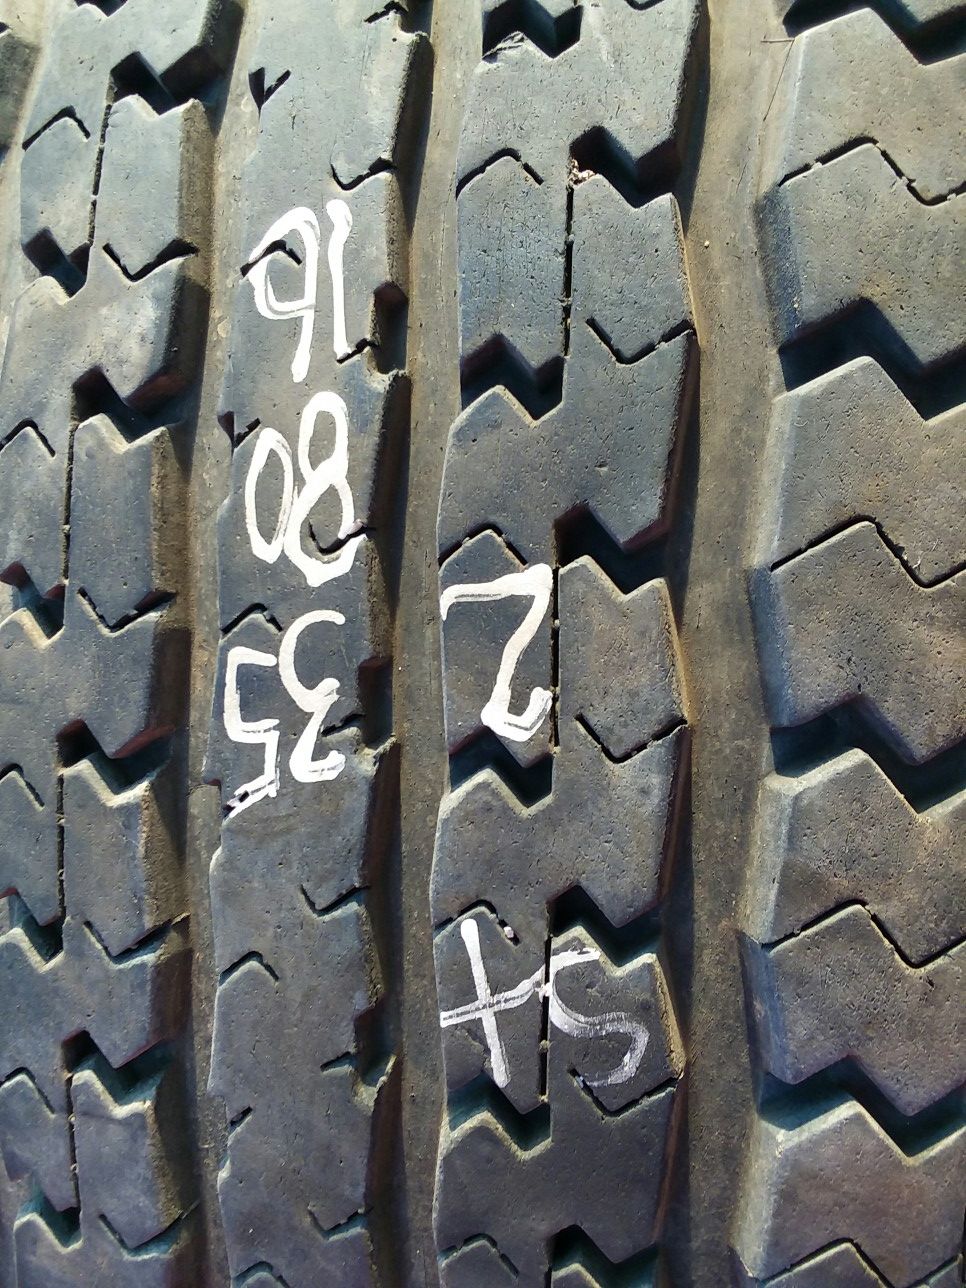 ST235 80 16 two trailer tires $20each